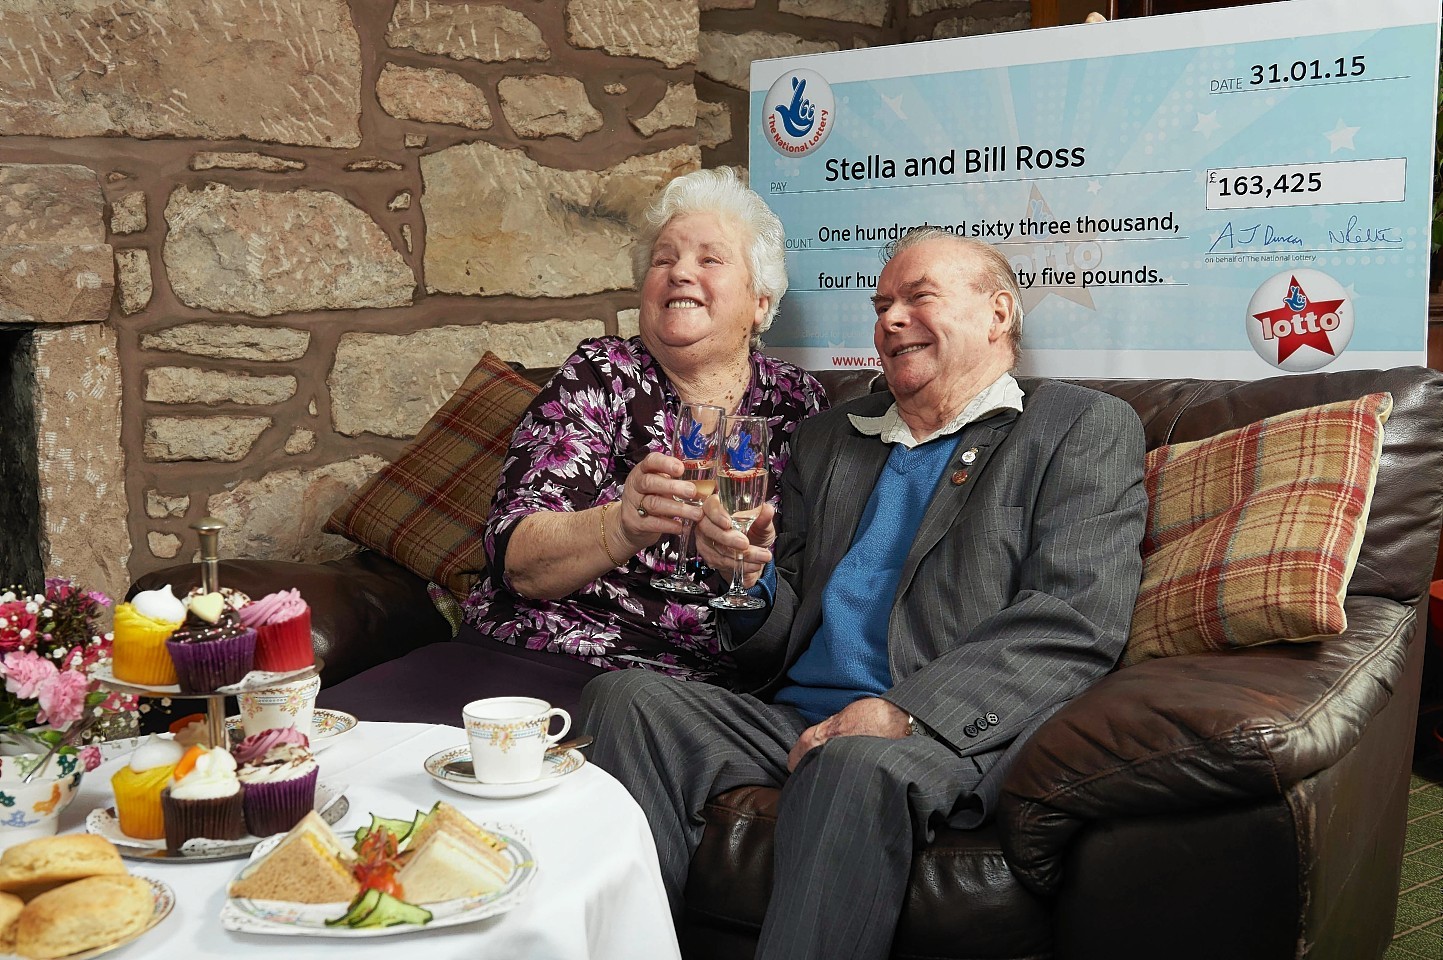 Nairn couple Bill and Stella Ross won big on the lottery